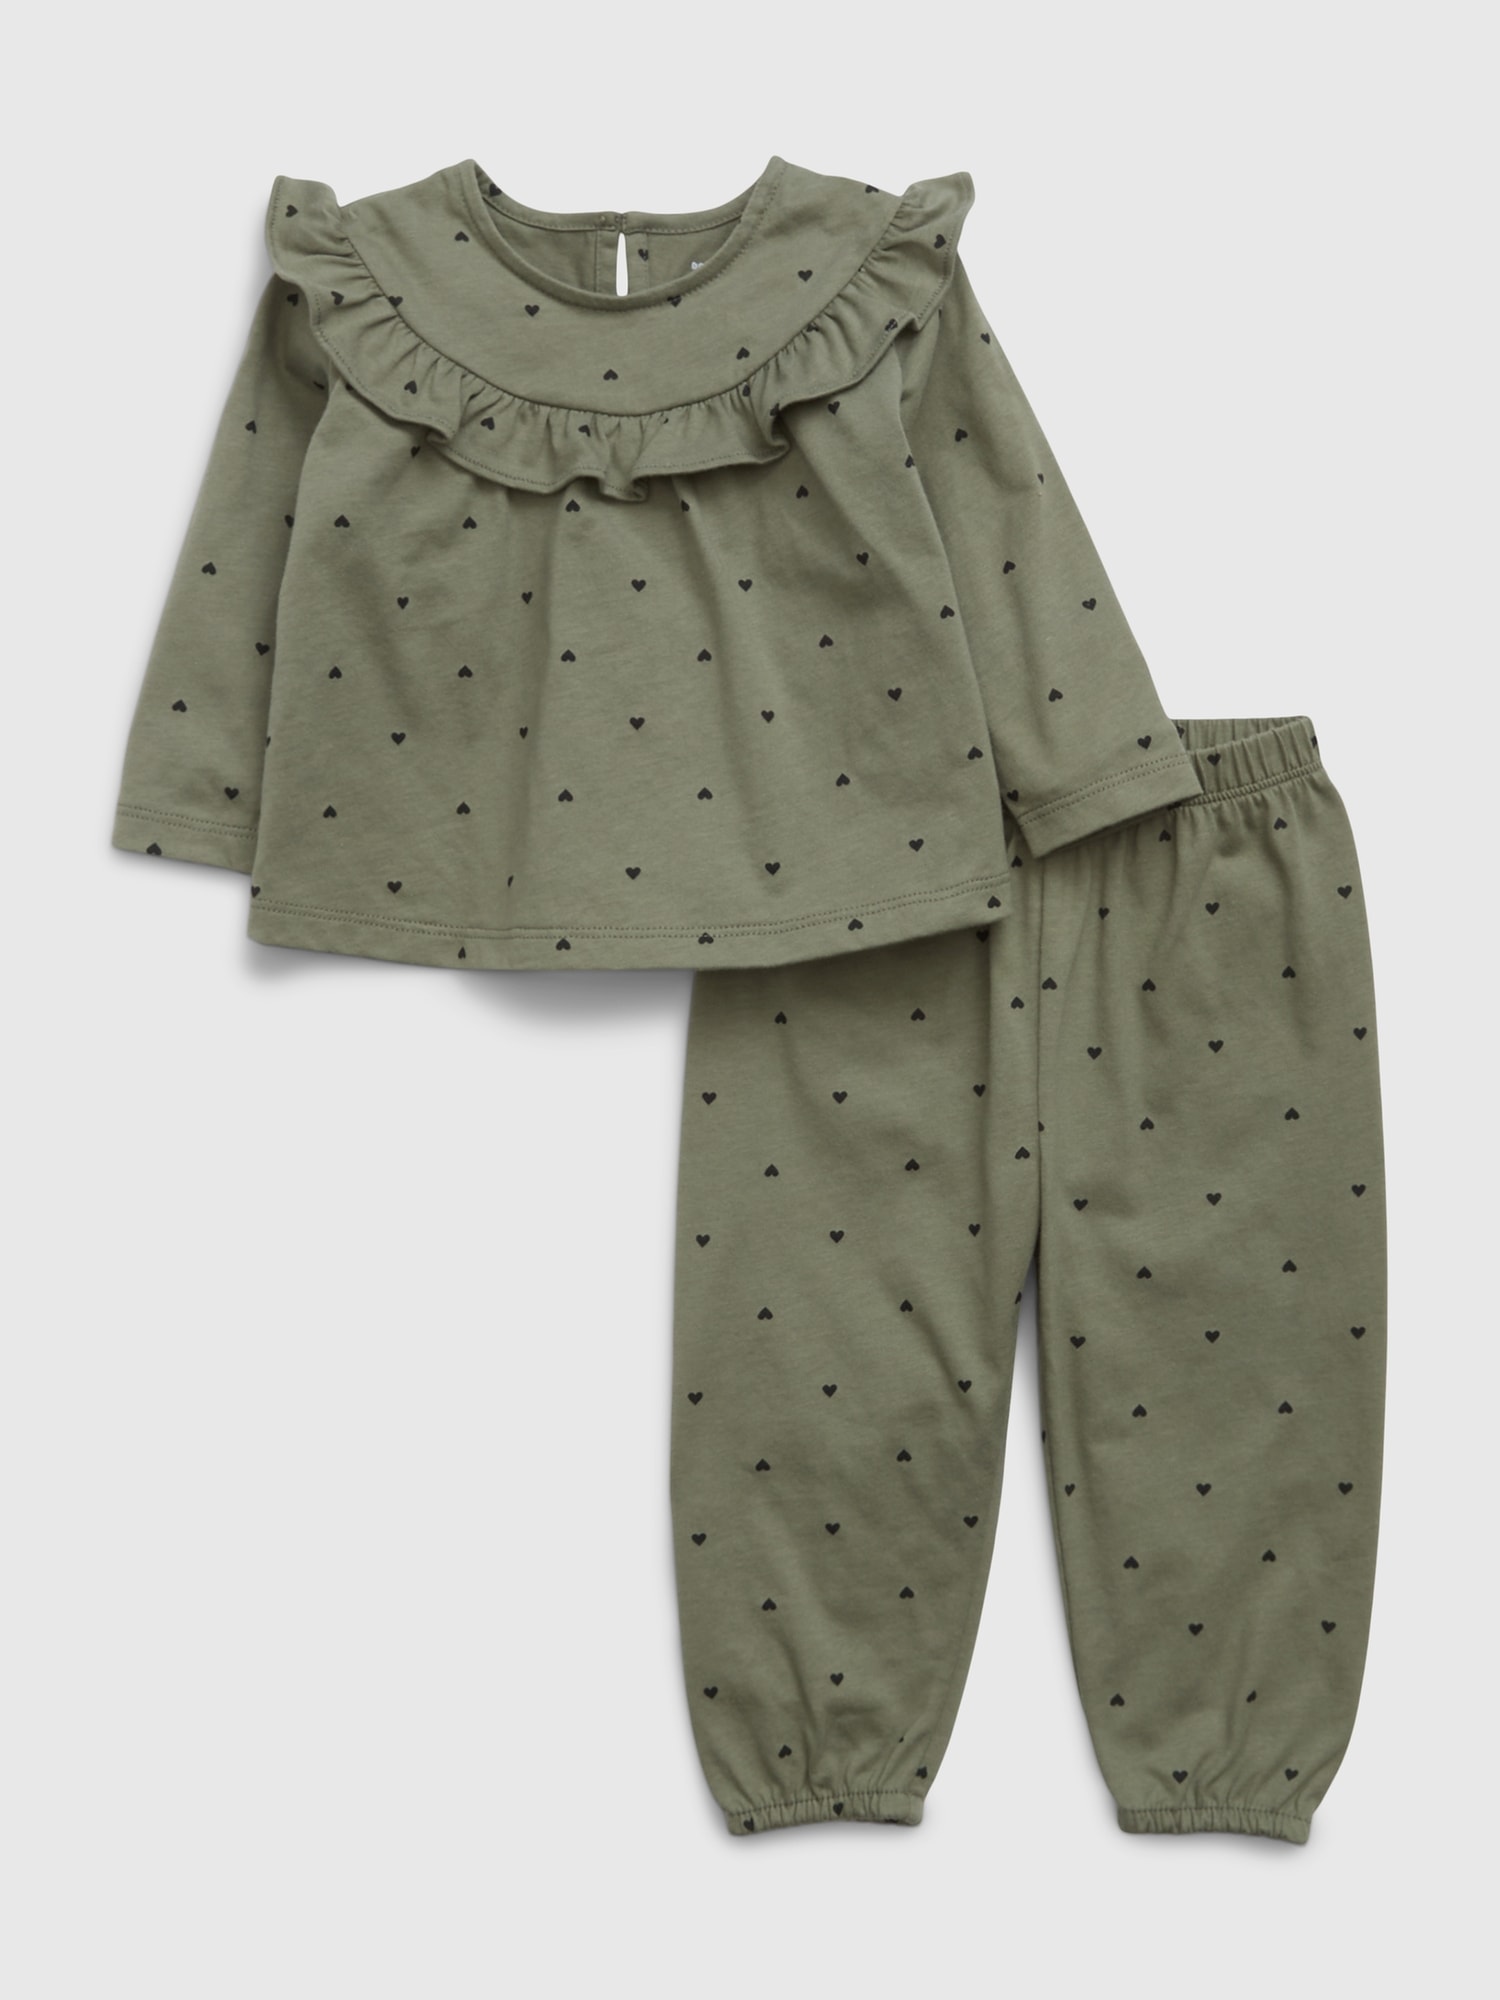 Gap Baby First Favorites Organic Cotton Ruffle Outfit Set